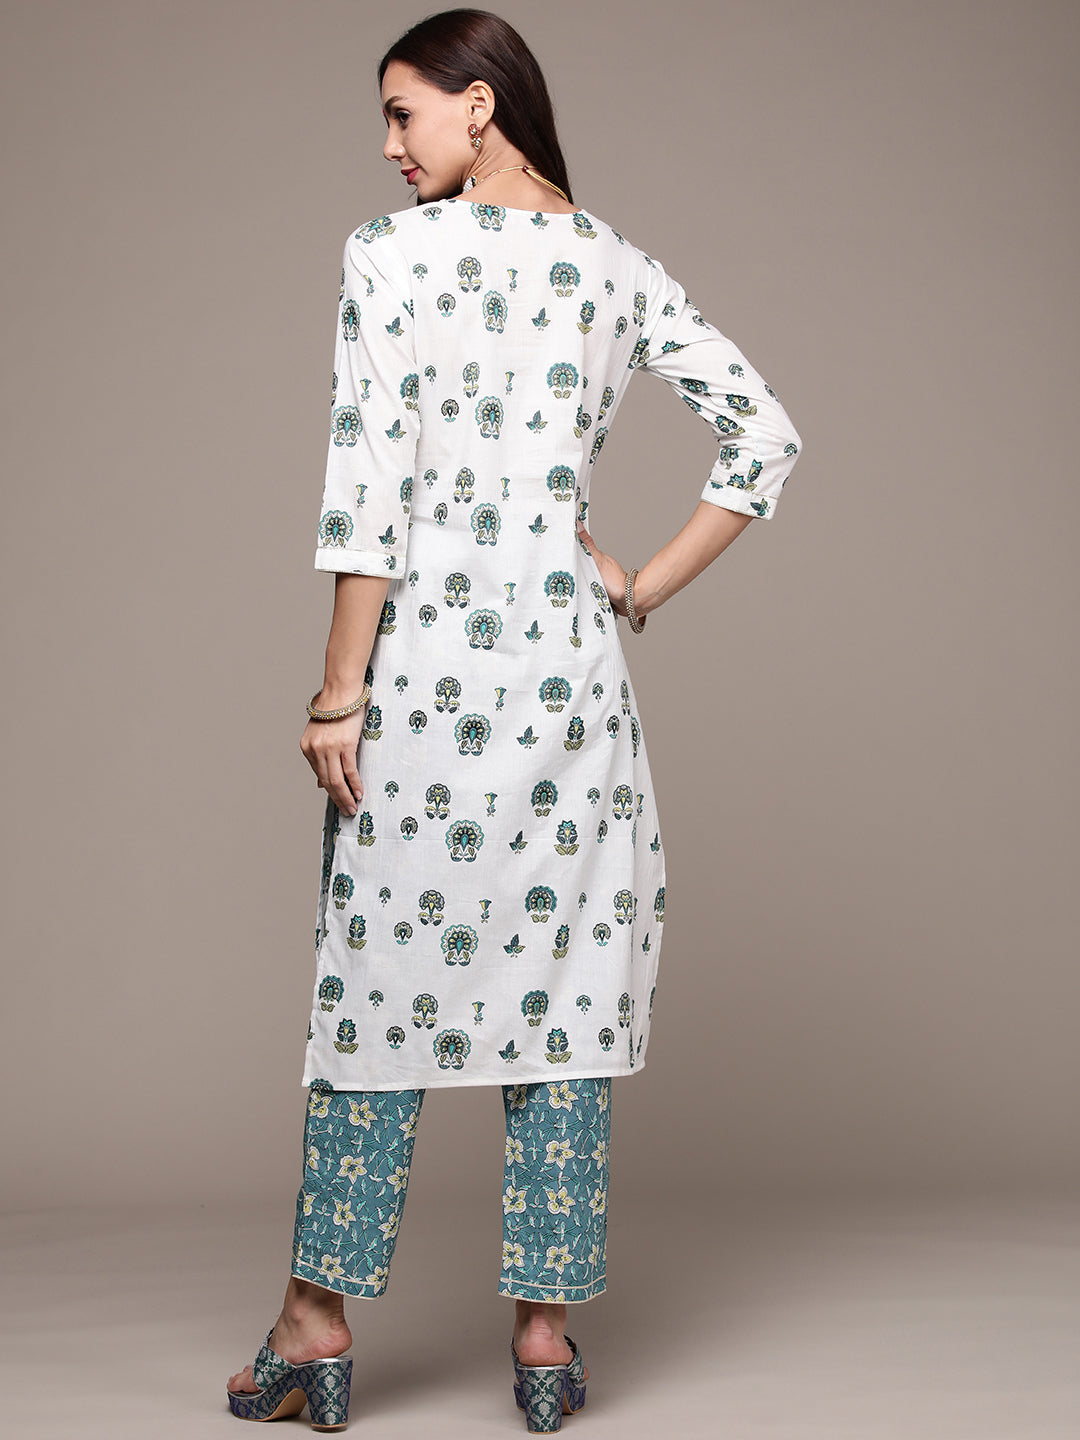 Women's Off white Embroidered Printed Kurta Set with Trousers